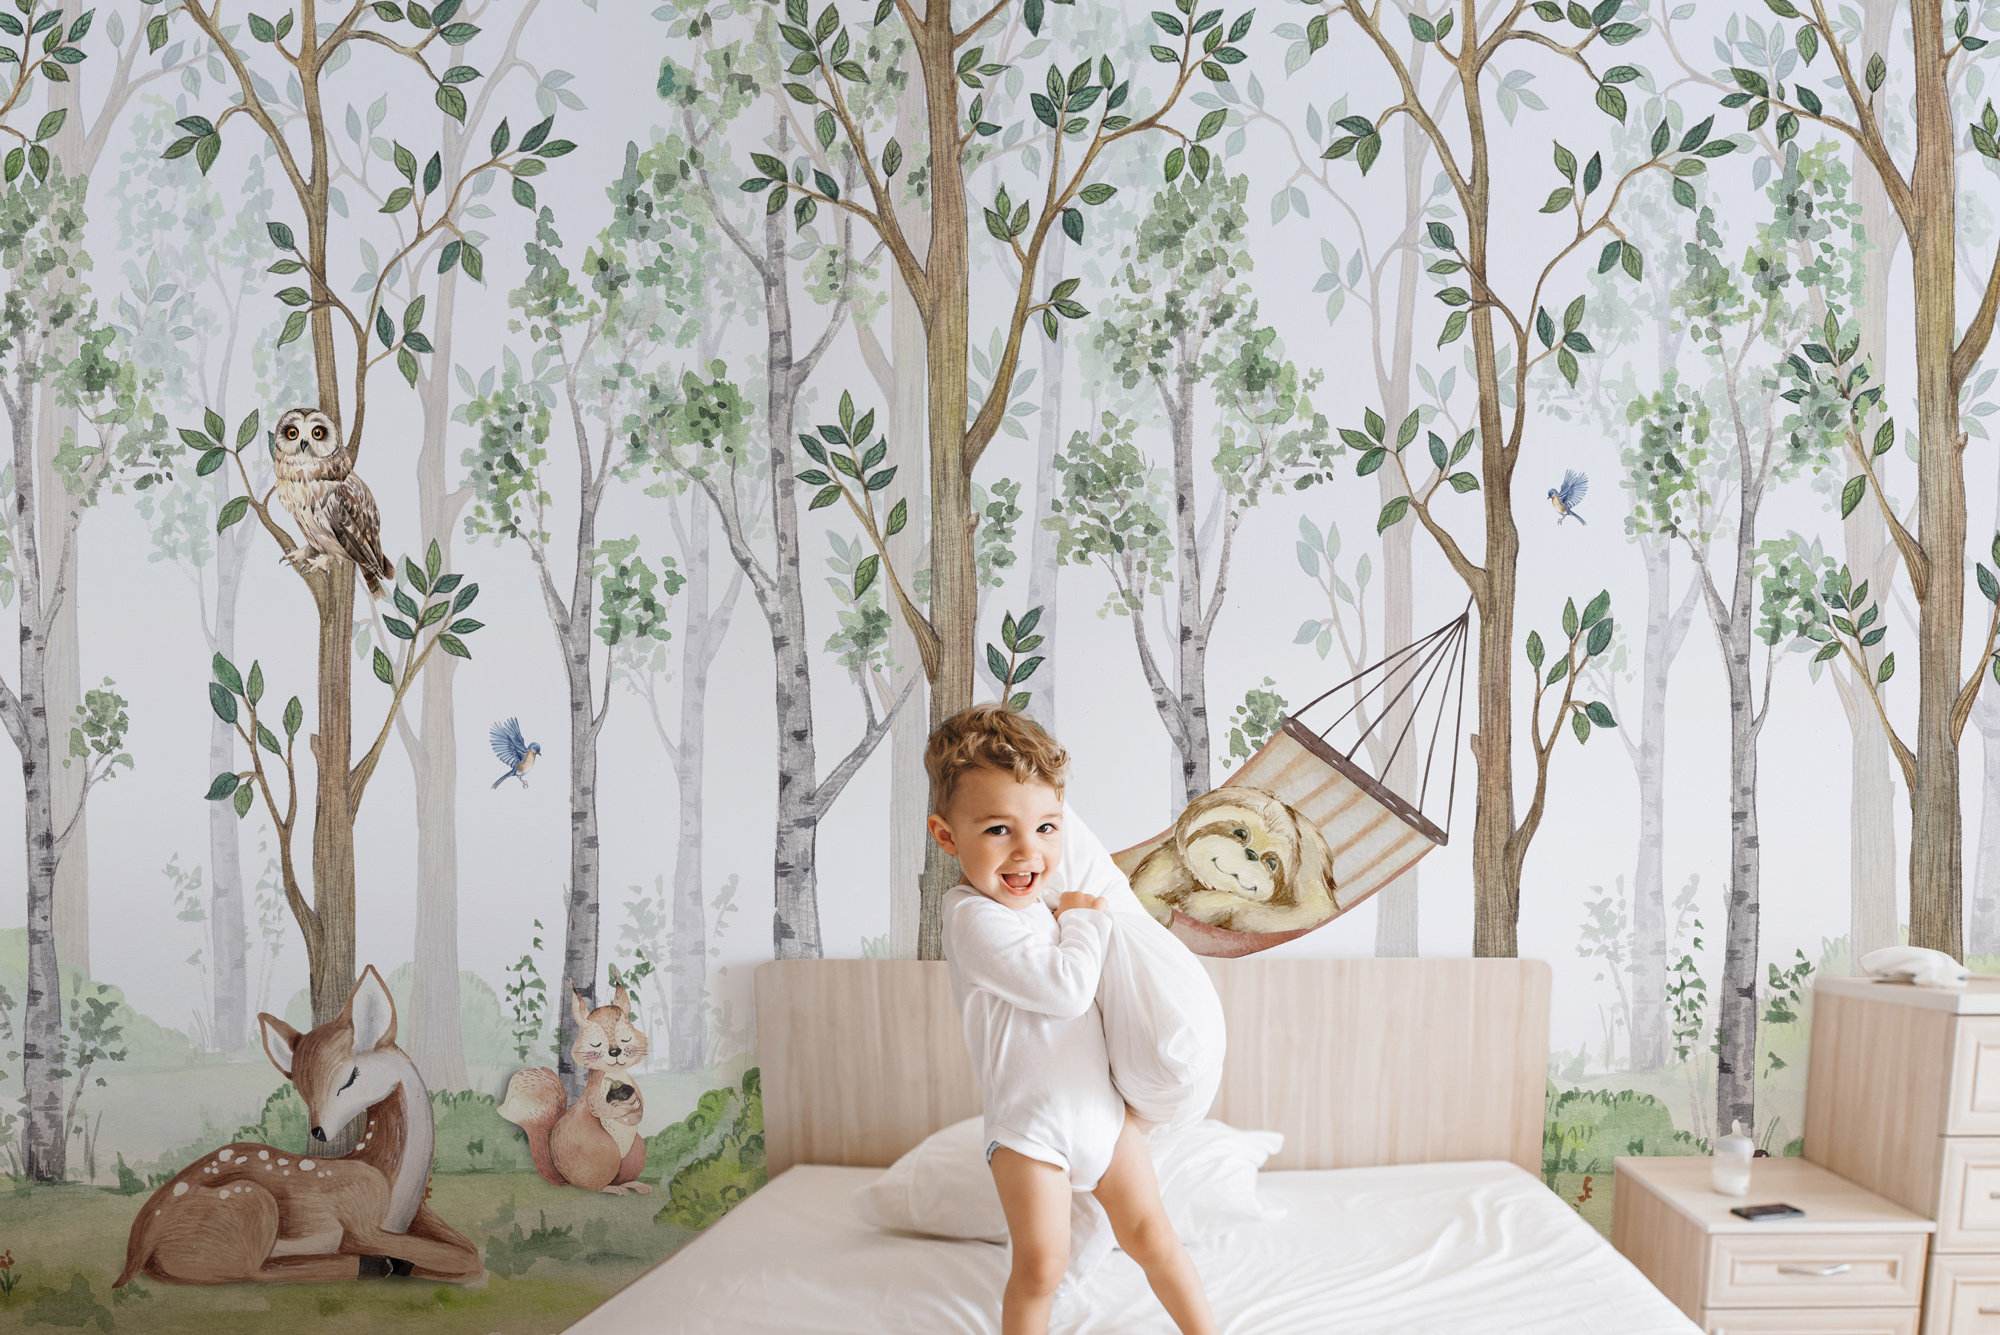 Amazoncom Murwall Kids Forest Wallpaper Cute Animal Wall Mural Nursery  Forest Animals Wallpaper STYLE2  Handmade Products